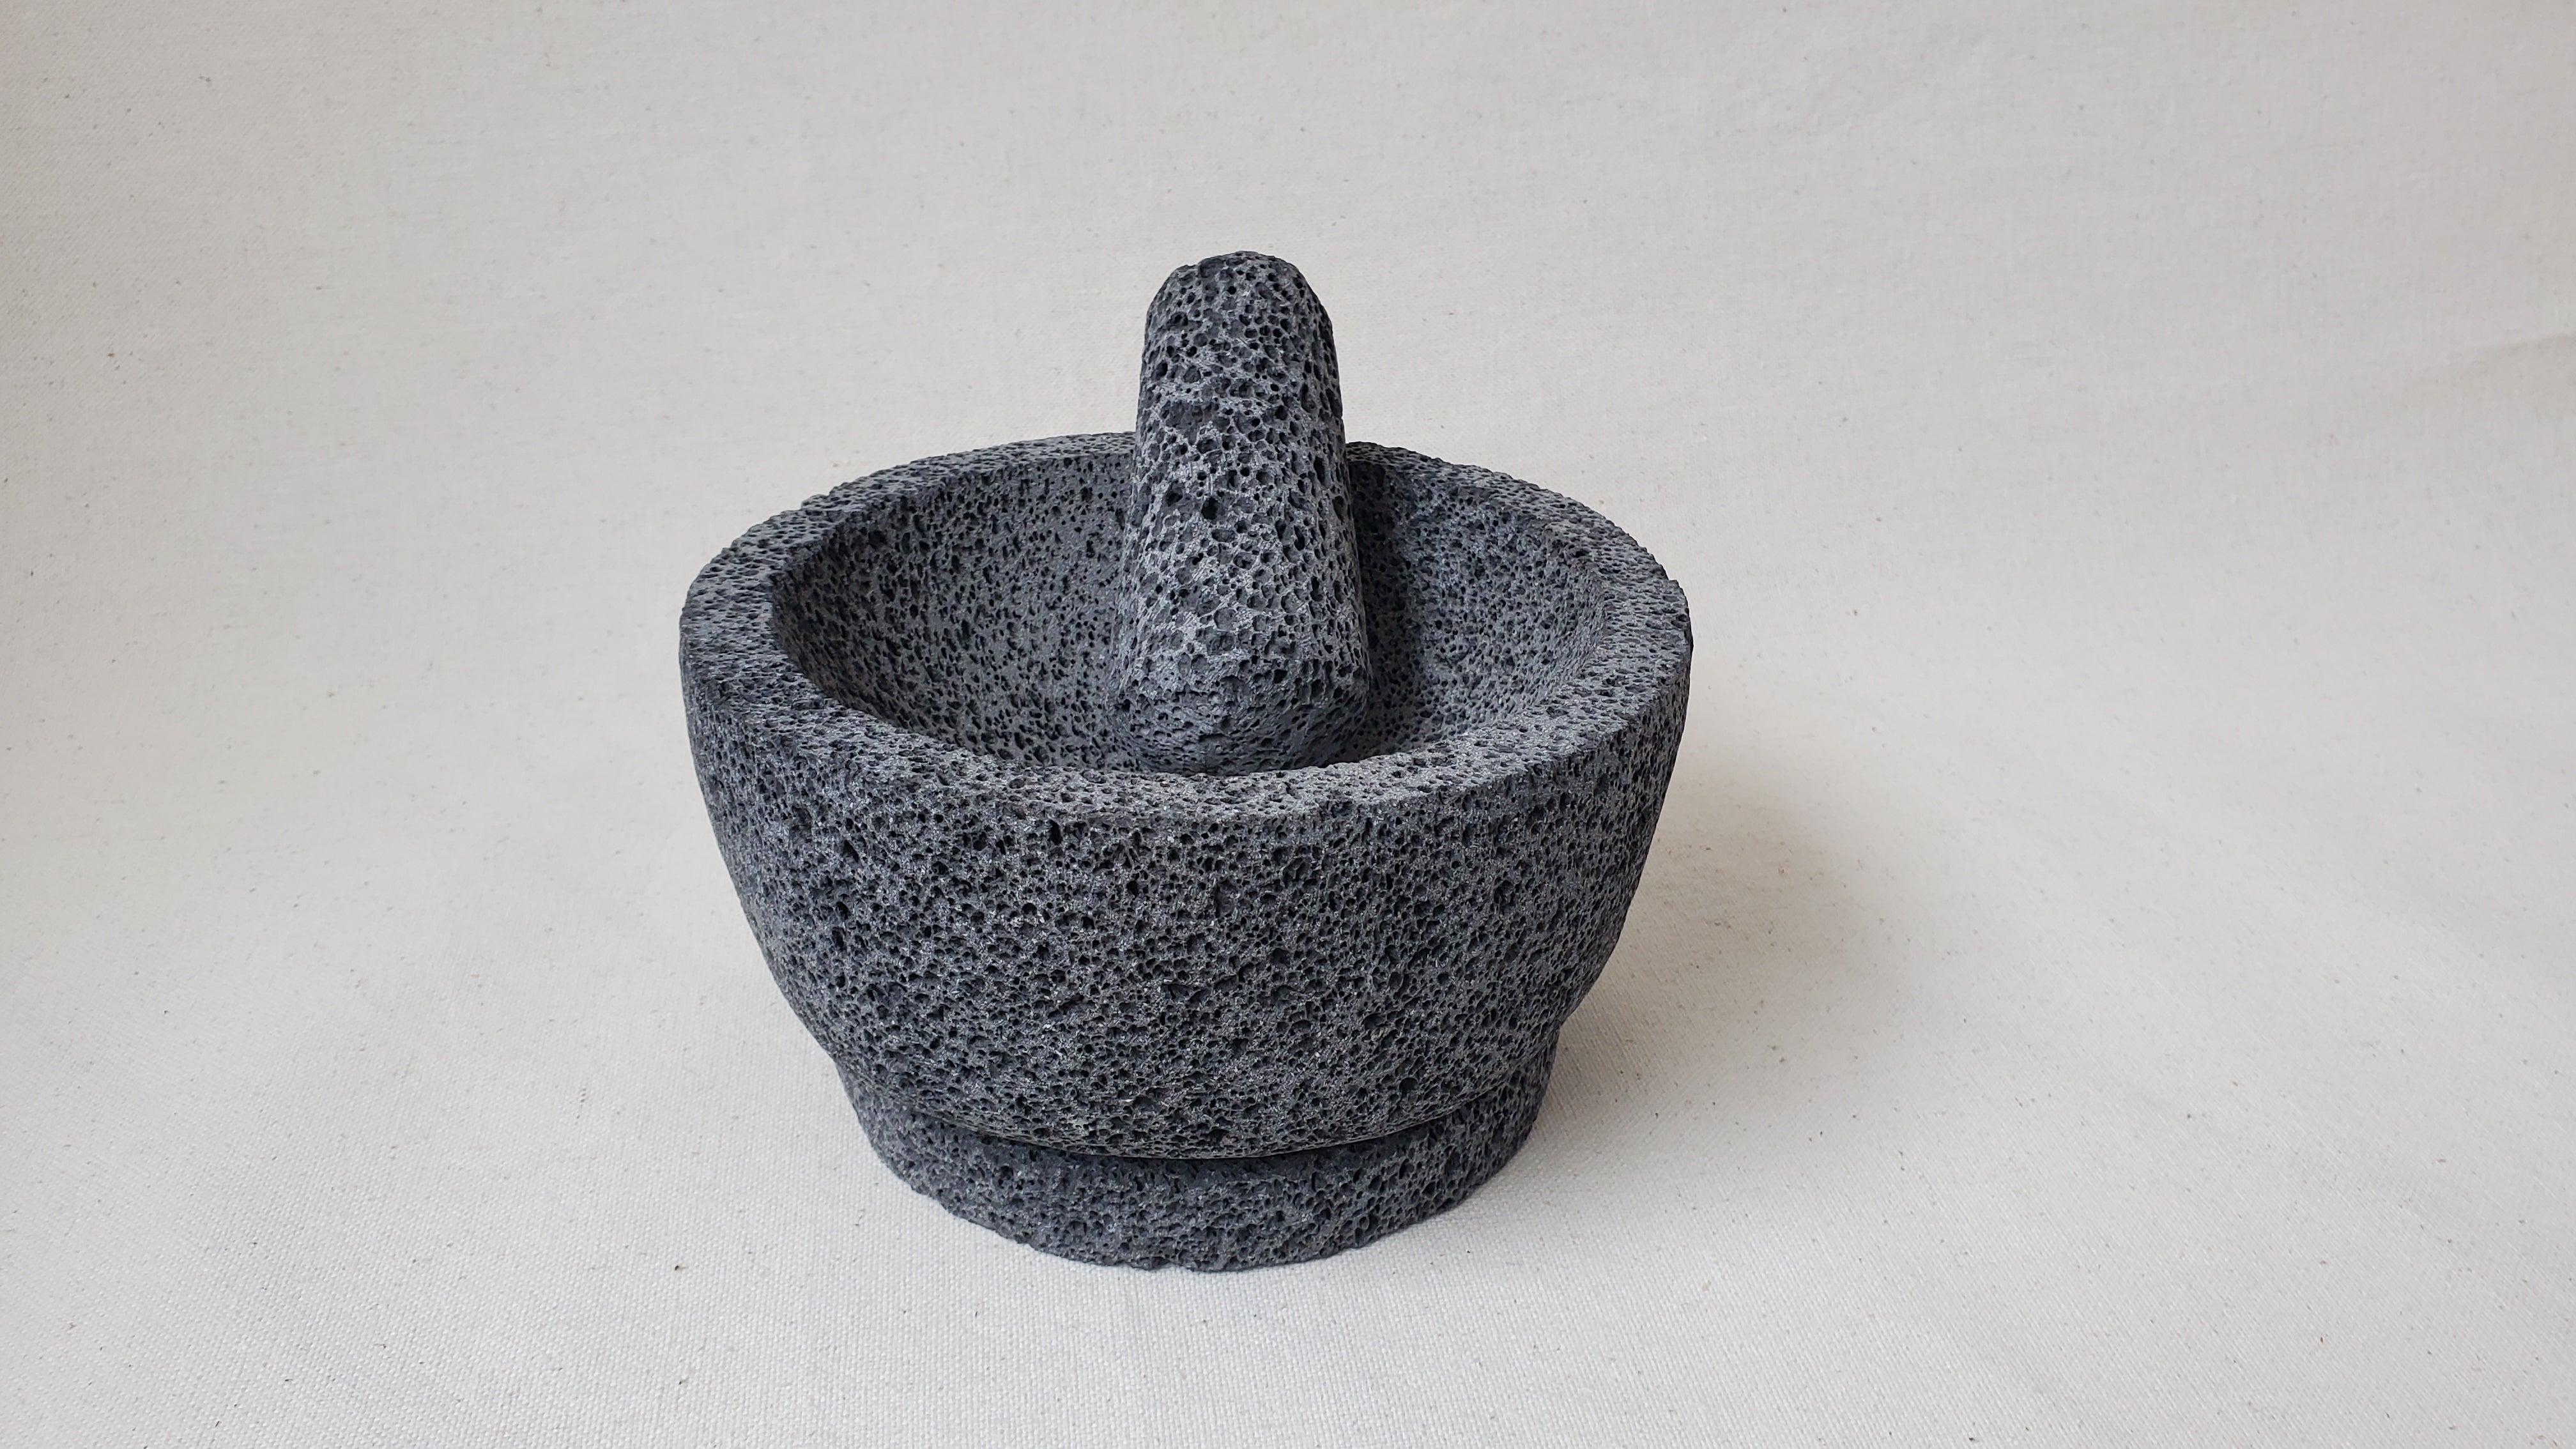 Authentic 8-inch Molcajete Pestle and Mortar Set. Made of pure basalt volcanic lava rock. Handmade in Mexico using traditional techniques. We hand finish, package, and ship from the USA. Buy now at www.felipeandgrace.com.